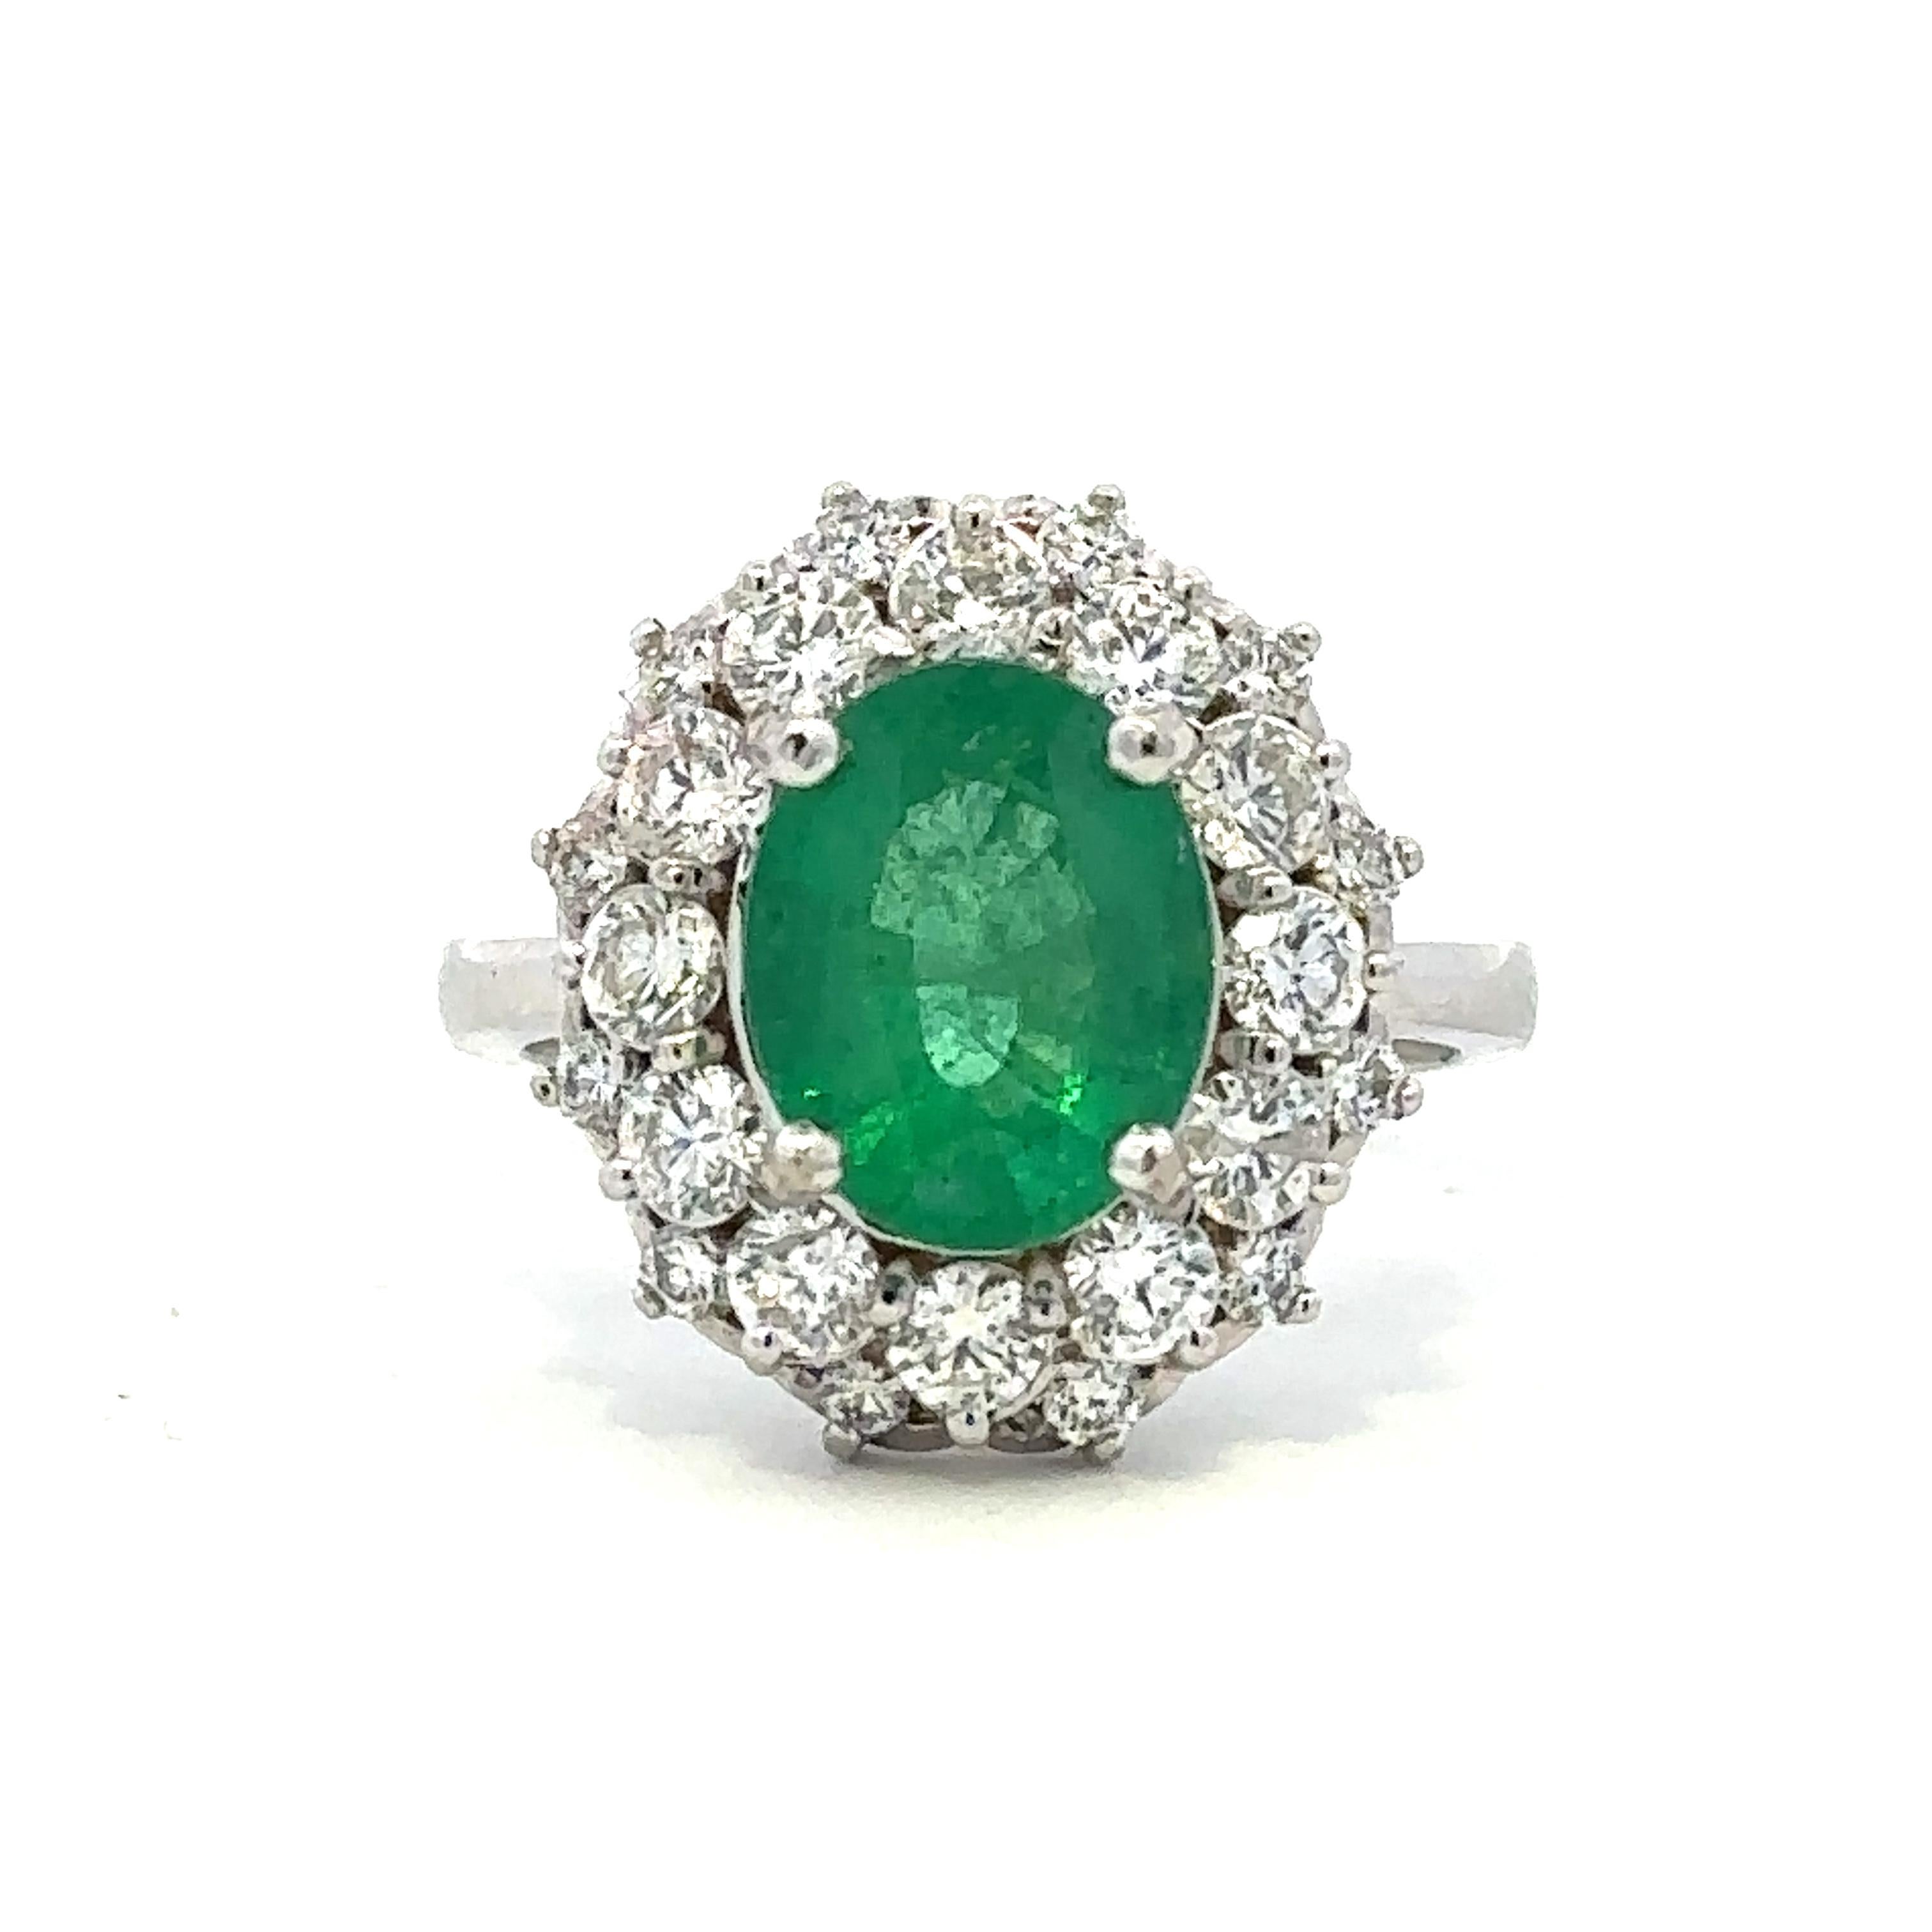 A stunning oval cut Colombian emerald set within a striking halo of round brilliant diamonds in 14k white gold. The emerald weighs approximately 3.5 cts and has moderate oil treatment. The diamonds have exceptional radiance, with SI1 clarity and G-H